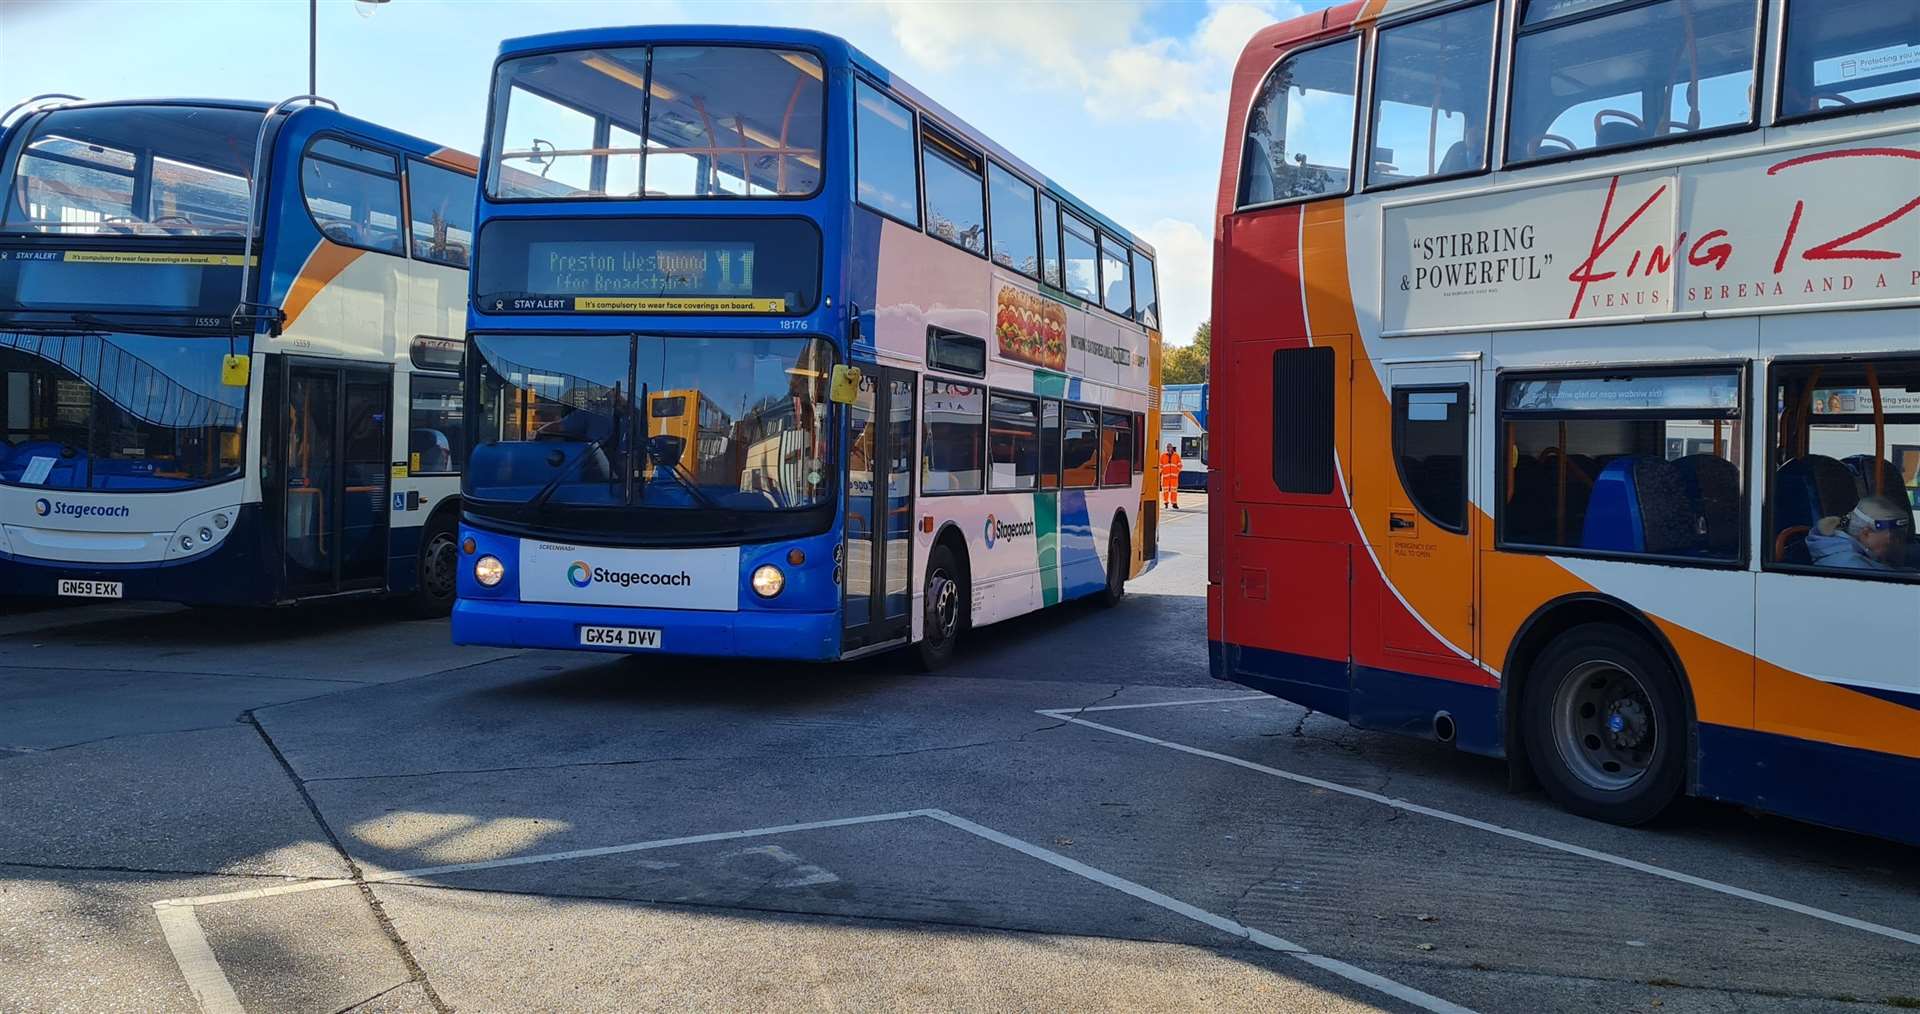 Stagecoach runs bus and school services across Kent